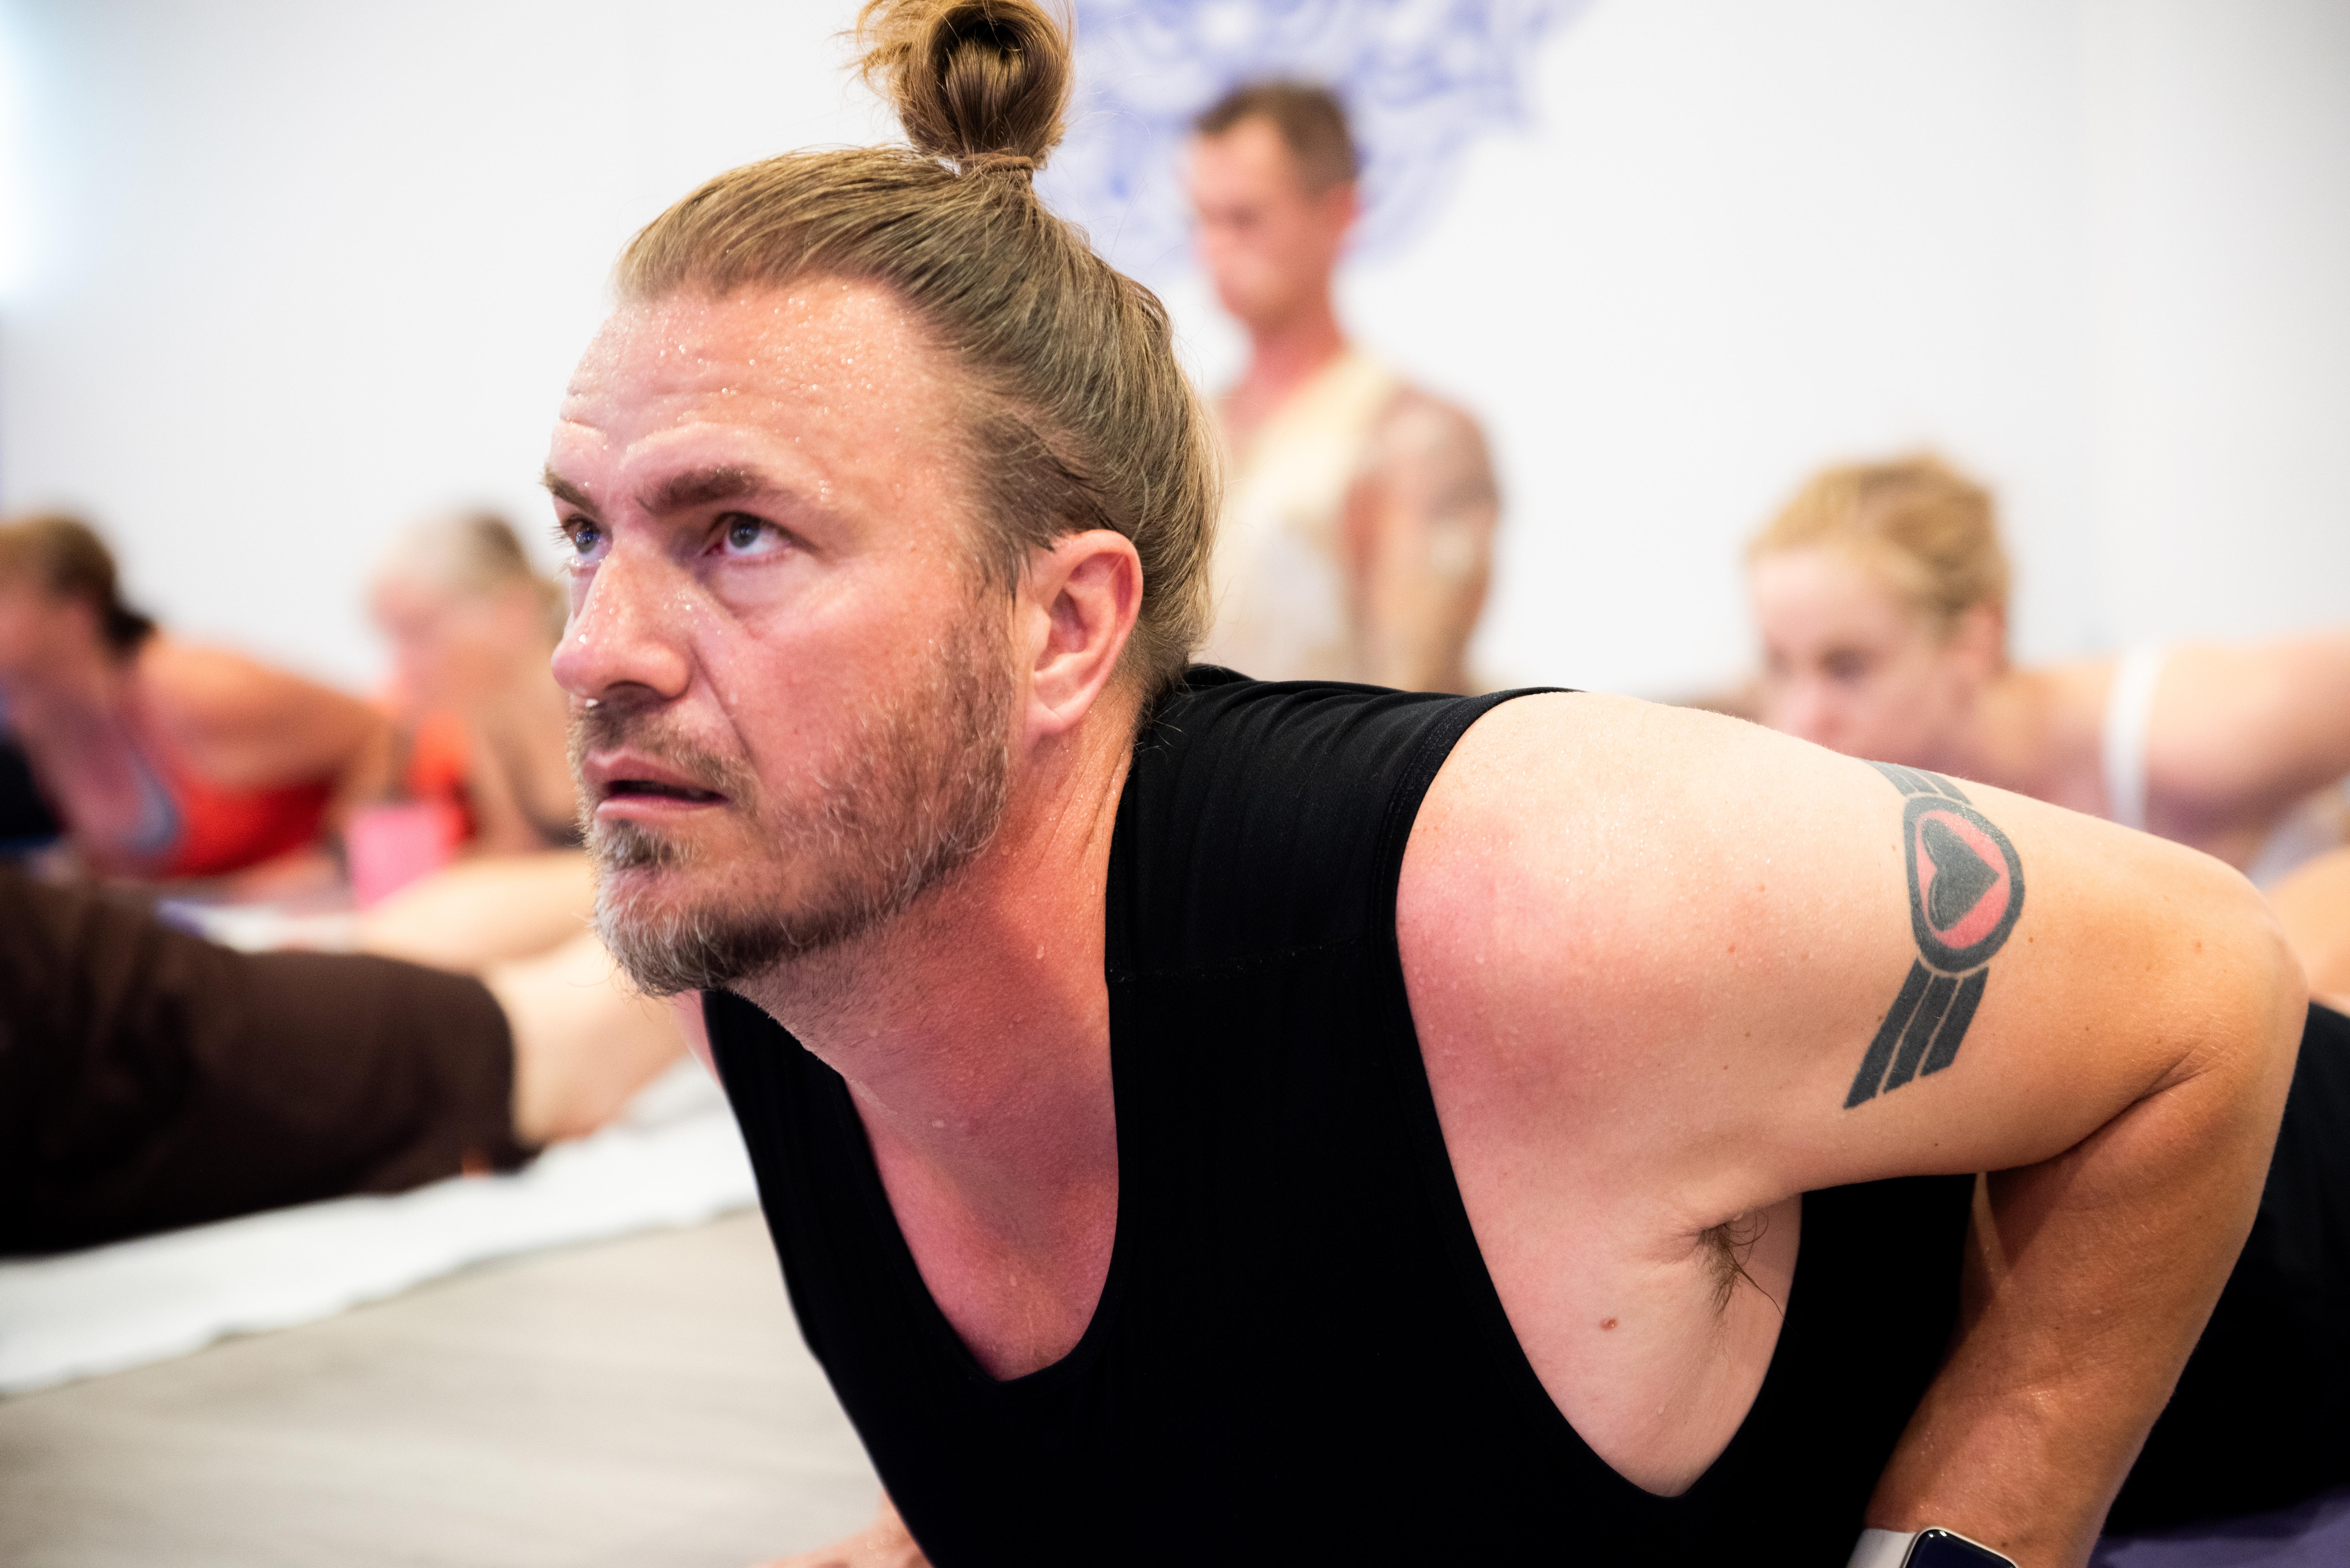 A man stretching in a hot yoga class with other participants